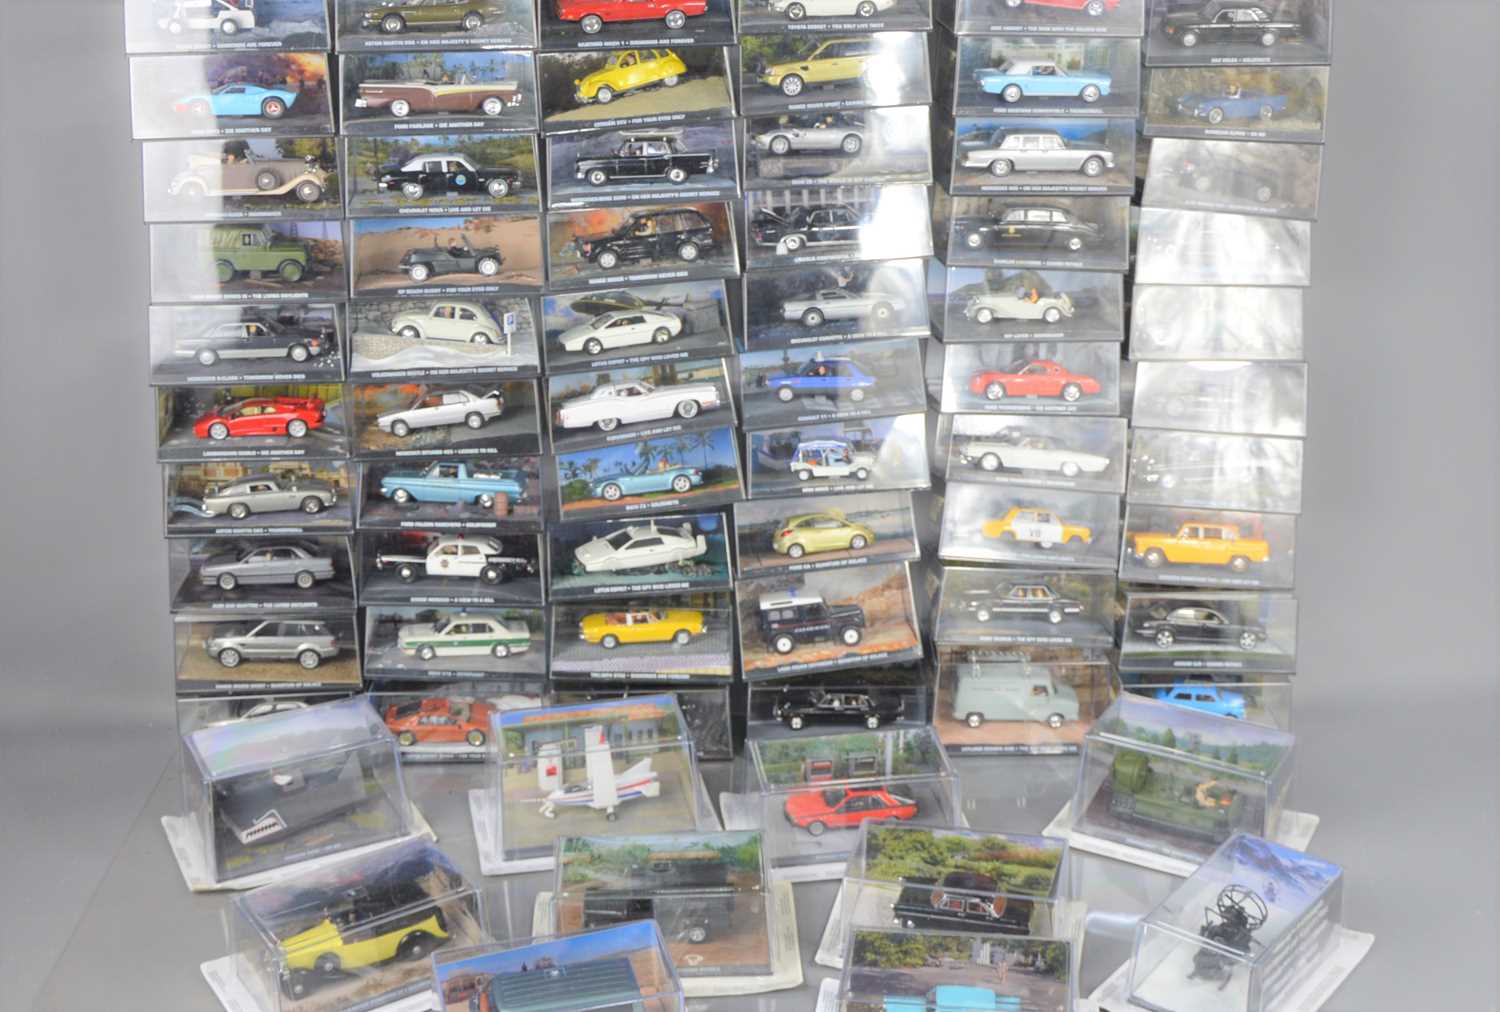 A large collection of James Bond diecast cars and vehicles by GE Fabbri Ltd, 2008.